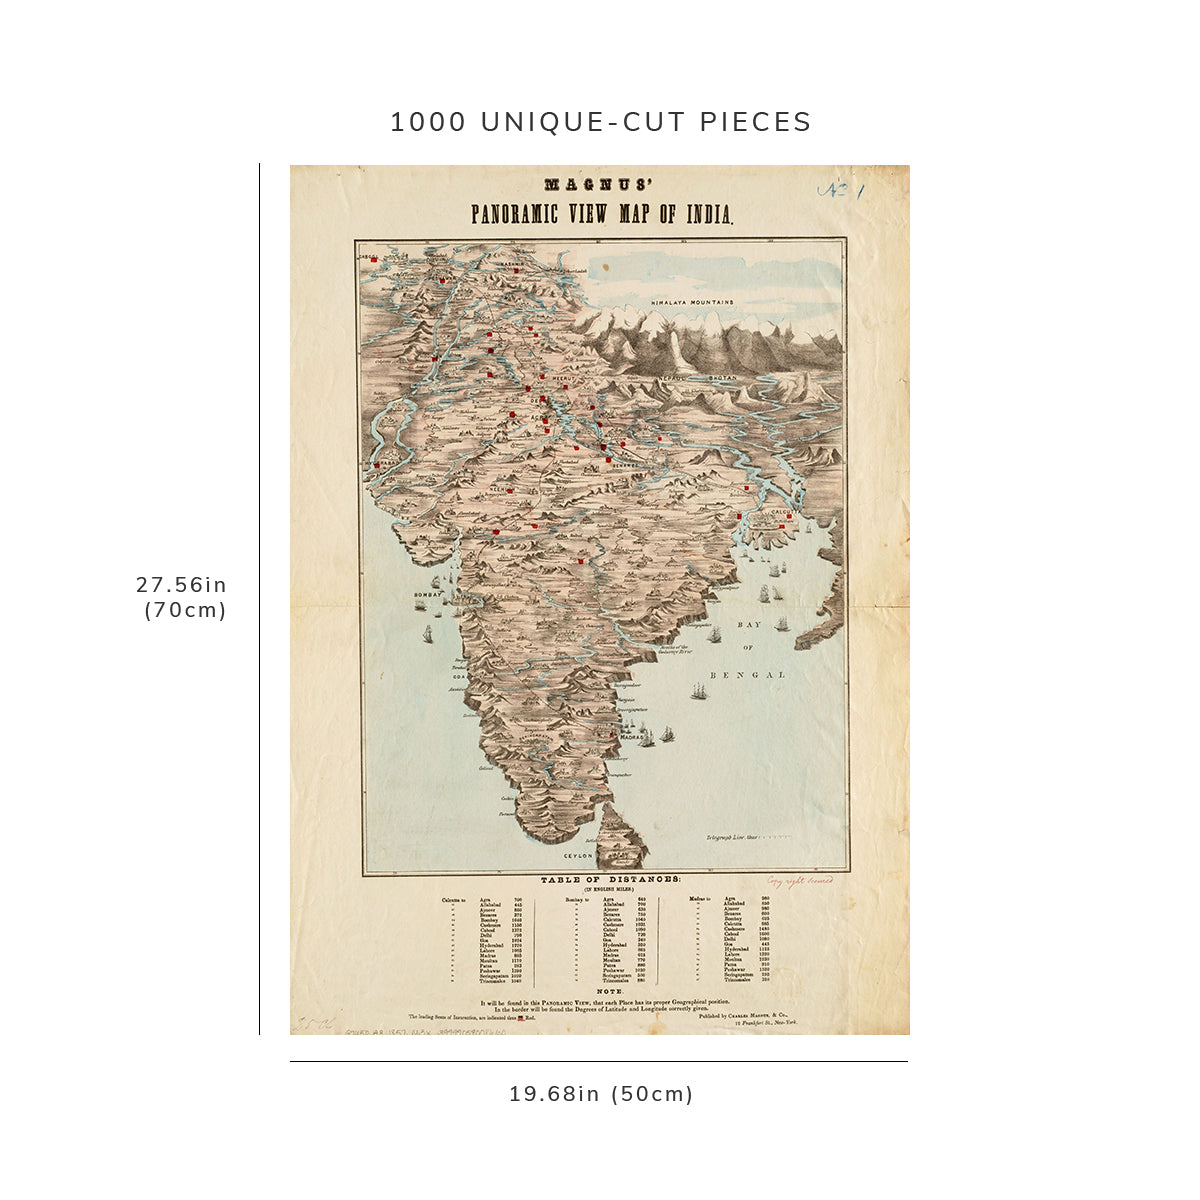 1000 Piece Jigsaw Puzzle: 1857 Map | Magnus' panoramic view map of India